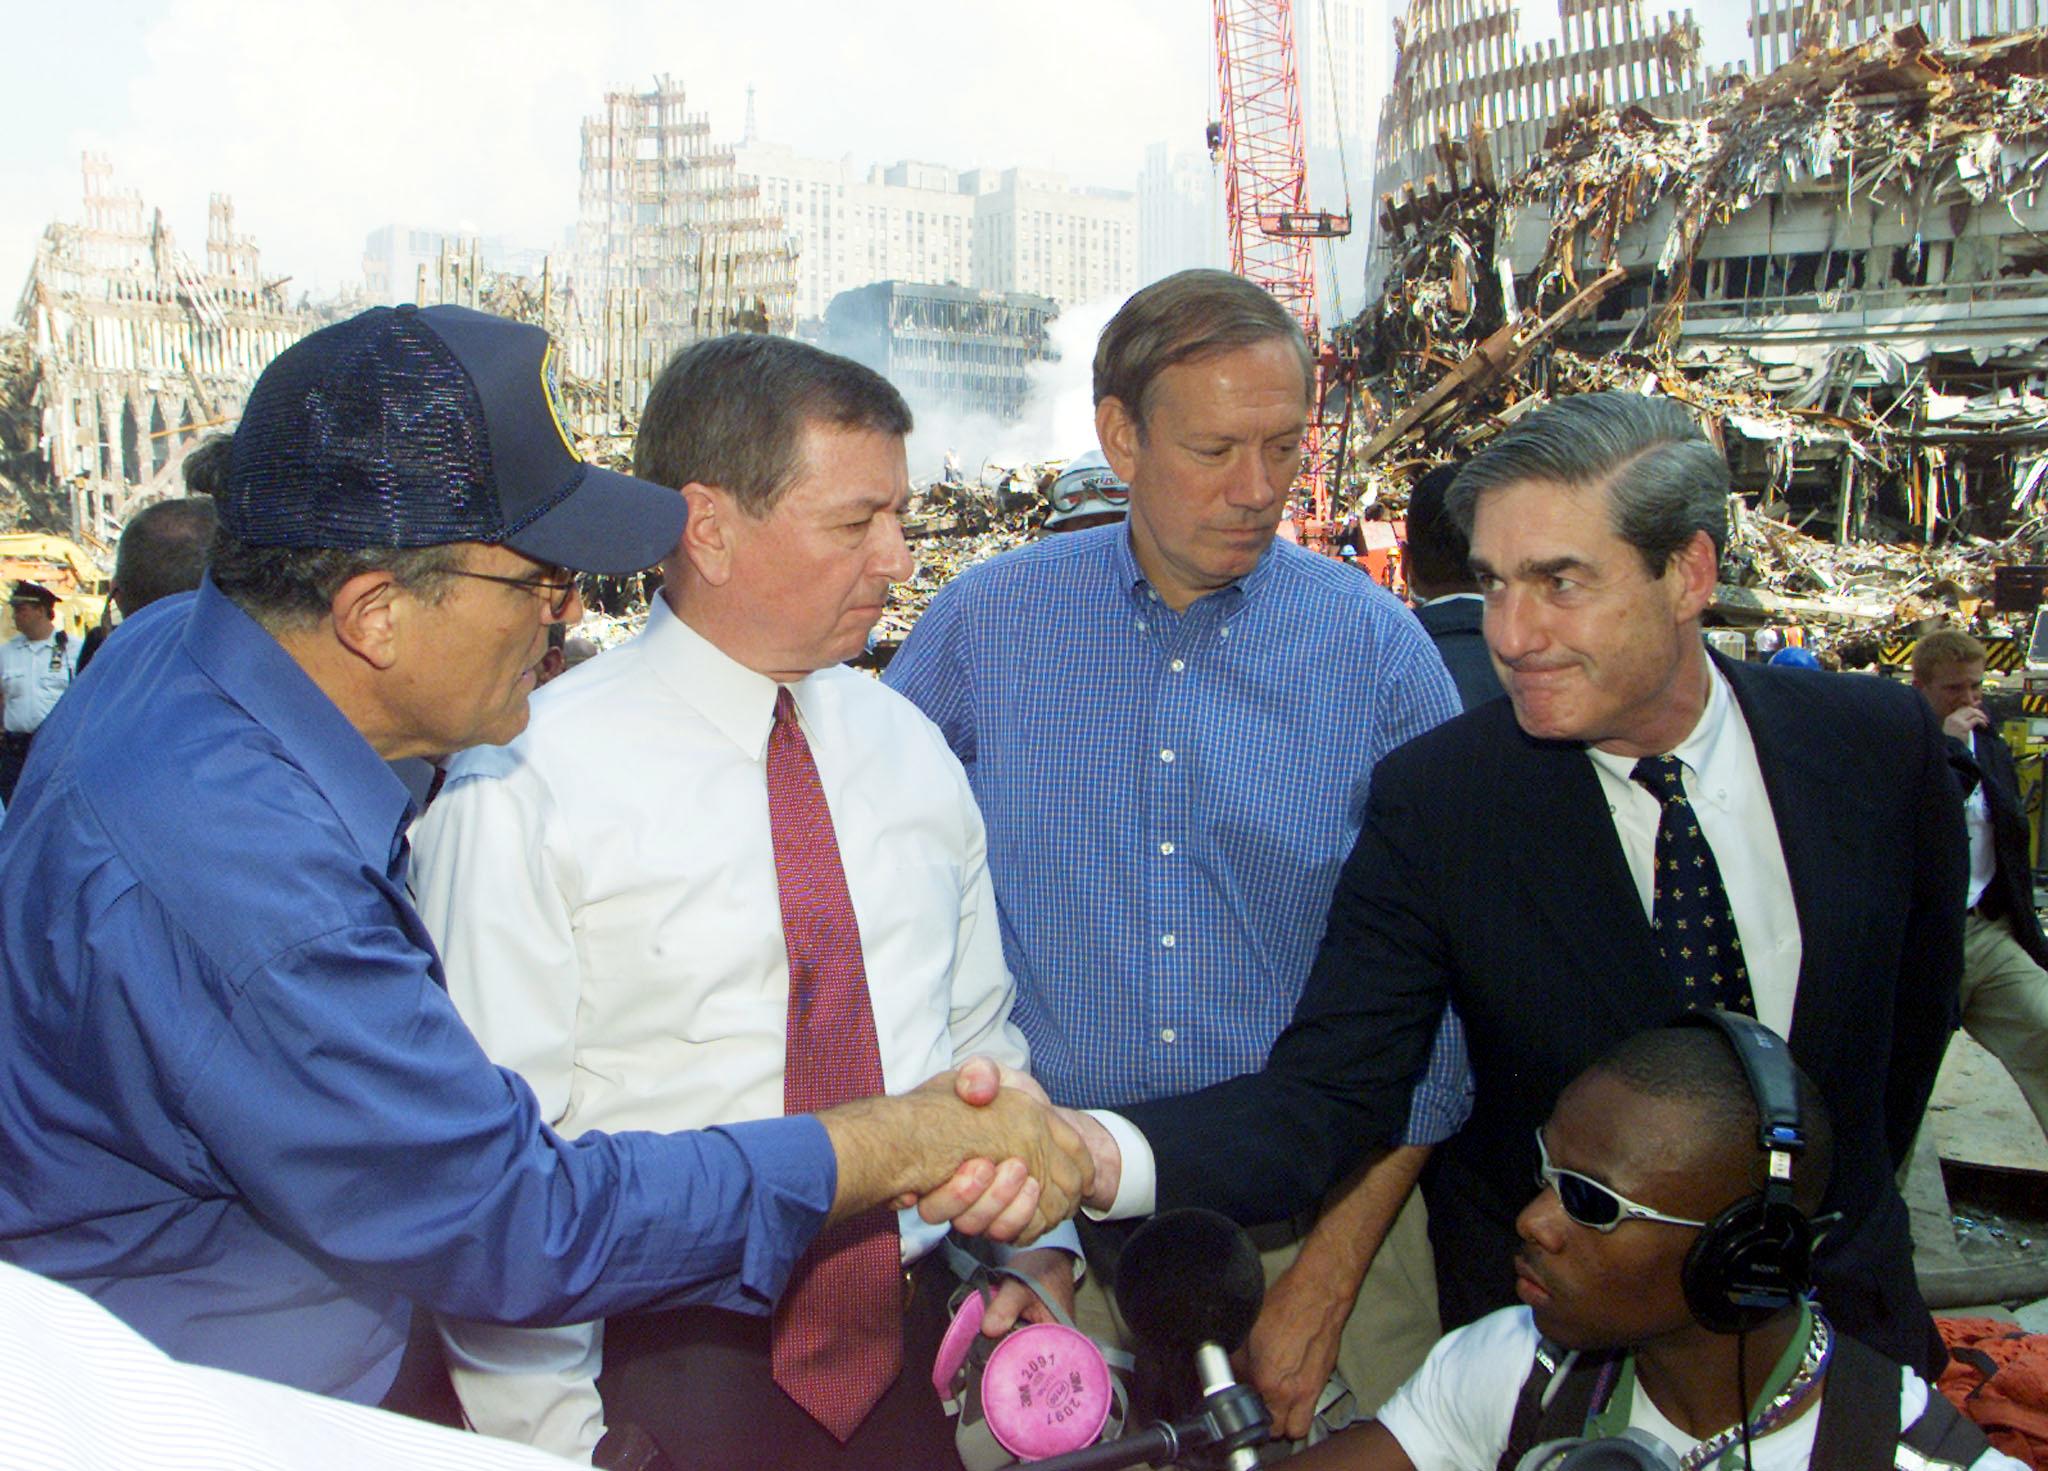 FBI Director Robert Mueller (R) shakes hands with New York Mayor Rudolph Giuliani (L) at the World Trade Disaster site in New York 21 September 2001.